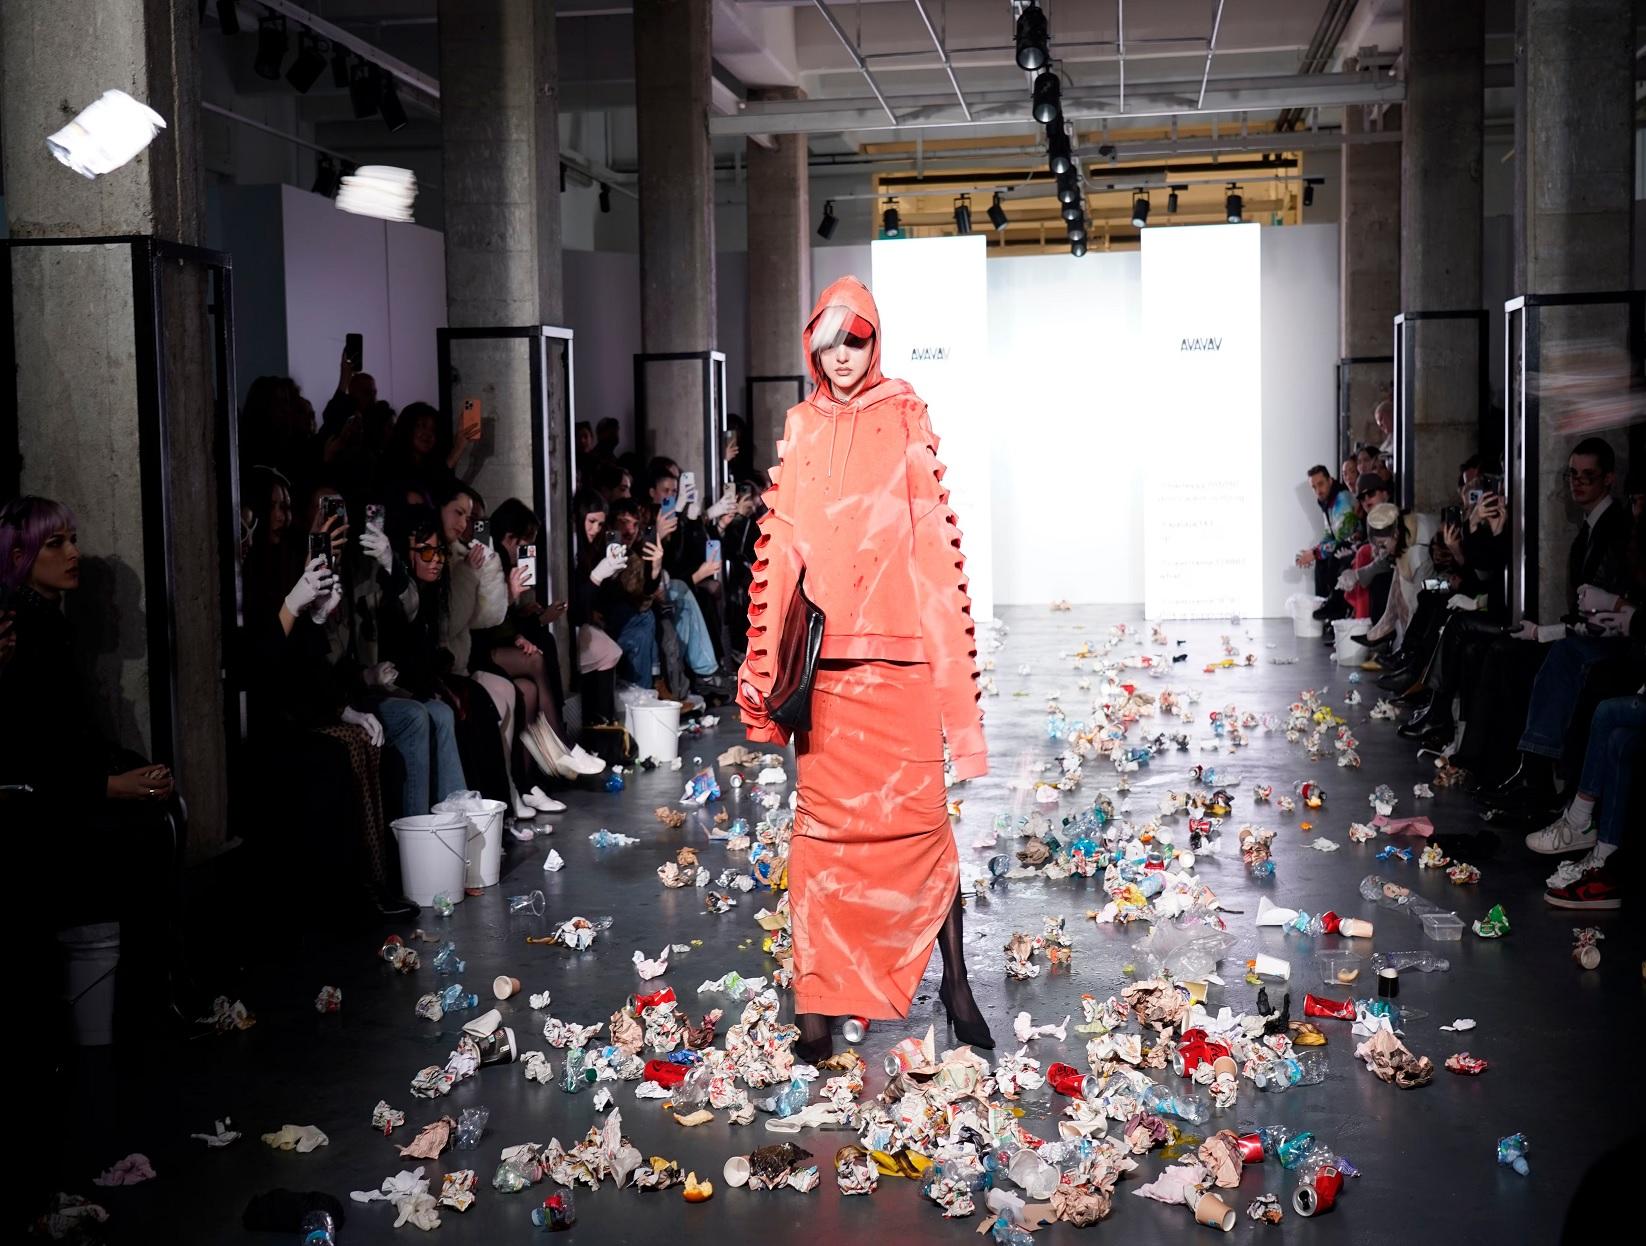 In A Strong Statement, This Brand Used Real Trash To Symbolize Online Hate At Milan Fashion Week